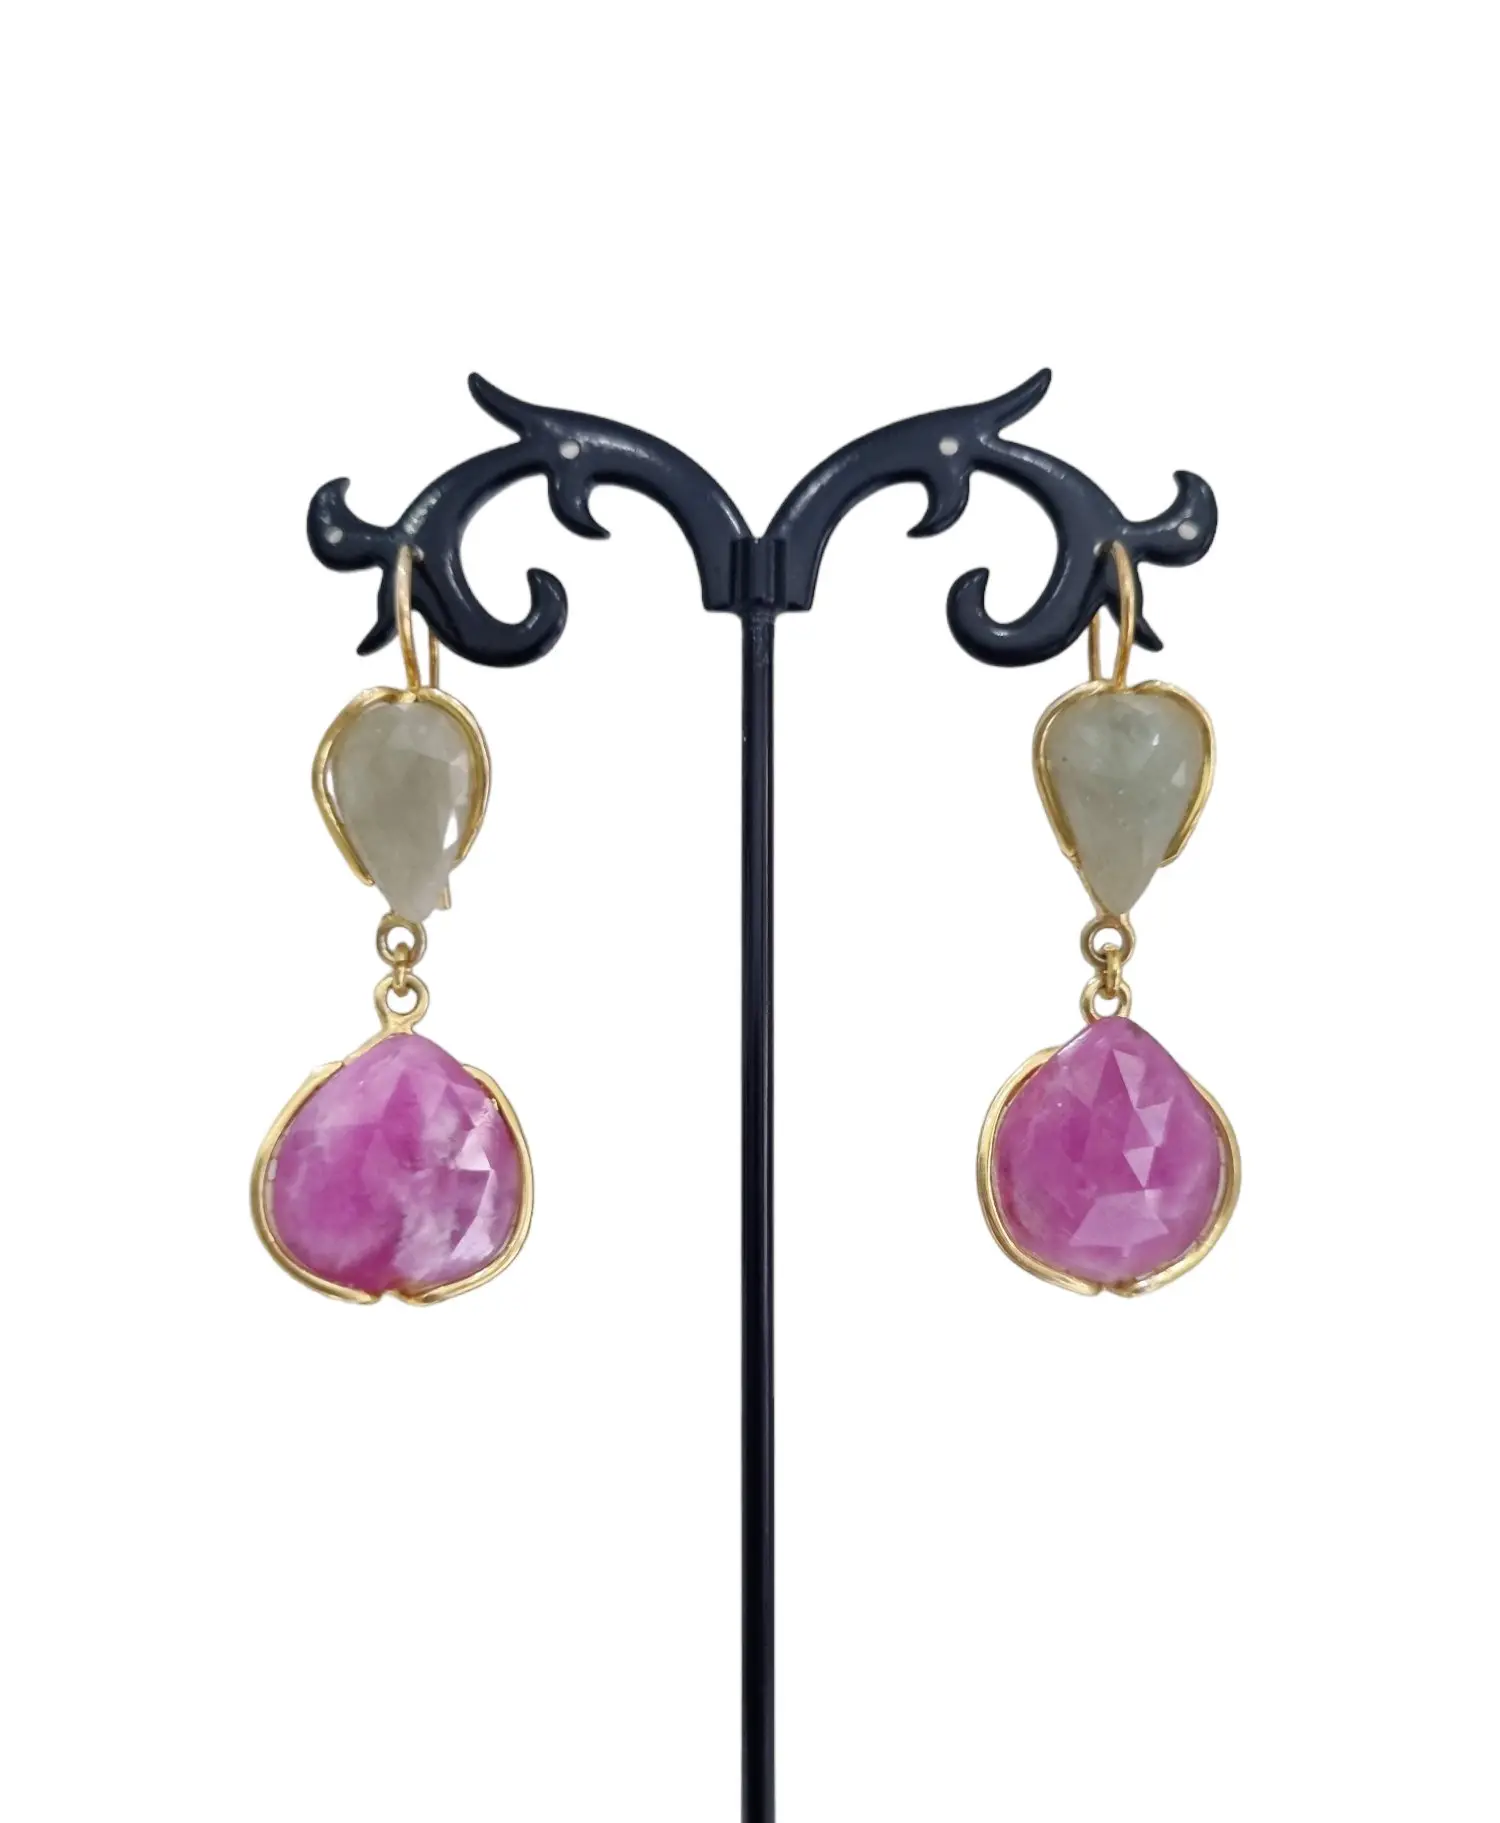 Earrings made with natural stones worked with gold-plated 925 silver. closed lever. Weight 6.2g Length 5.5cm